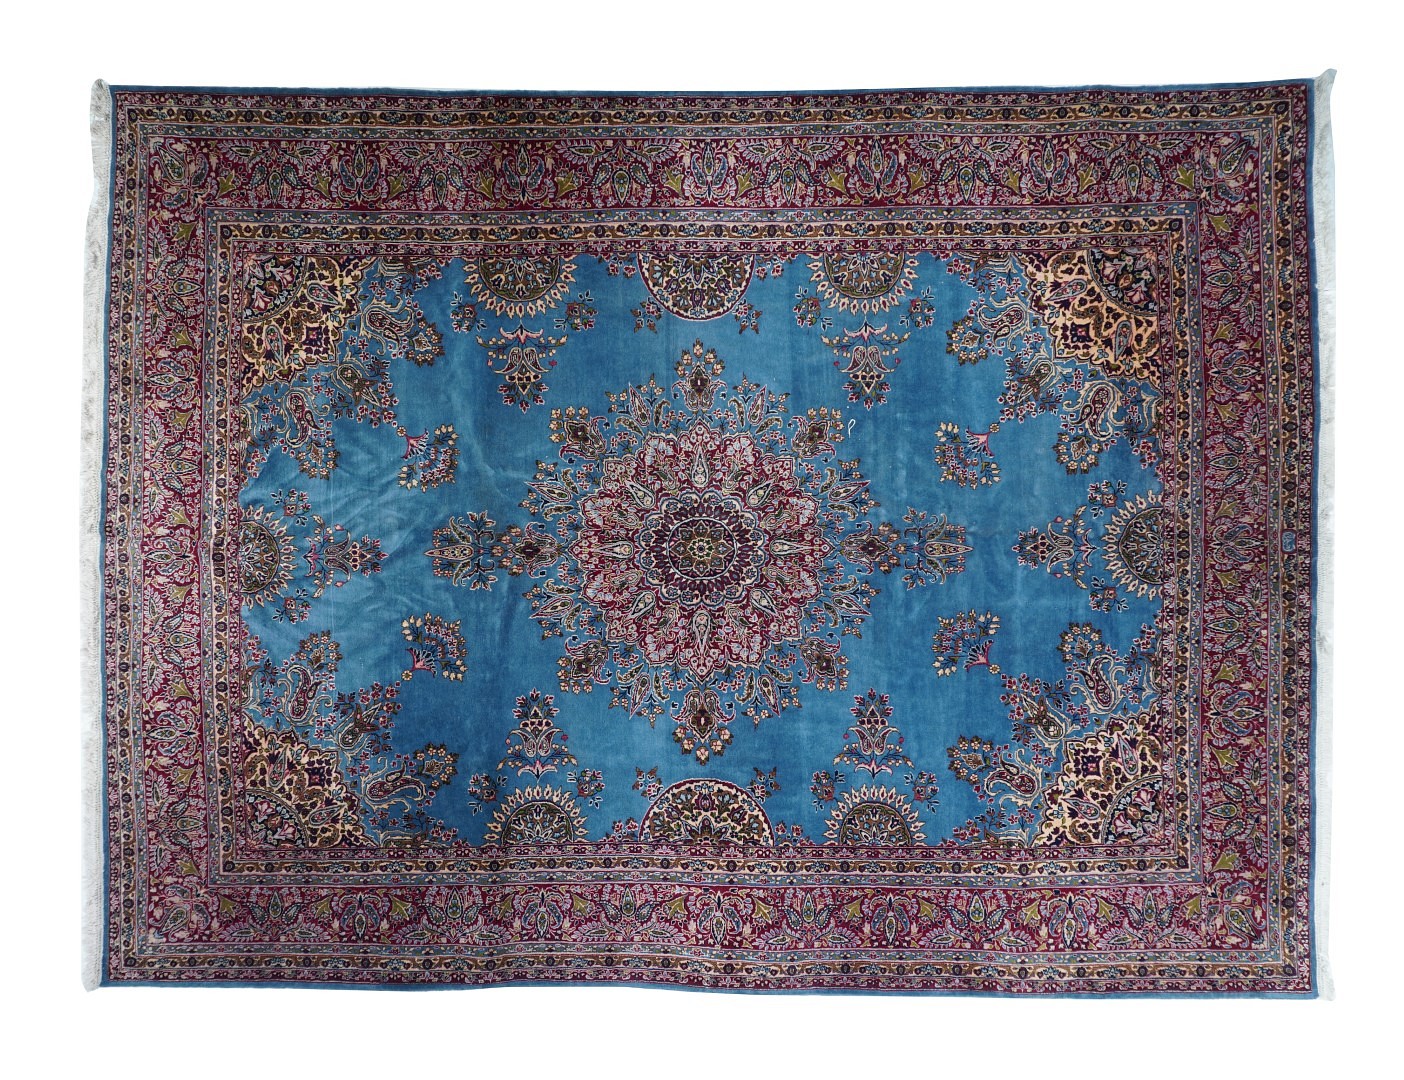 A Rare Collection of the Finest Antique Caucasian, Tribal & Fine Persian Rugs by 1stbid